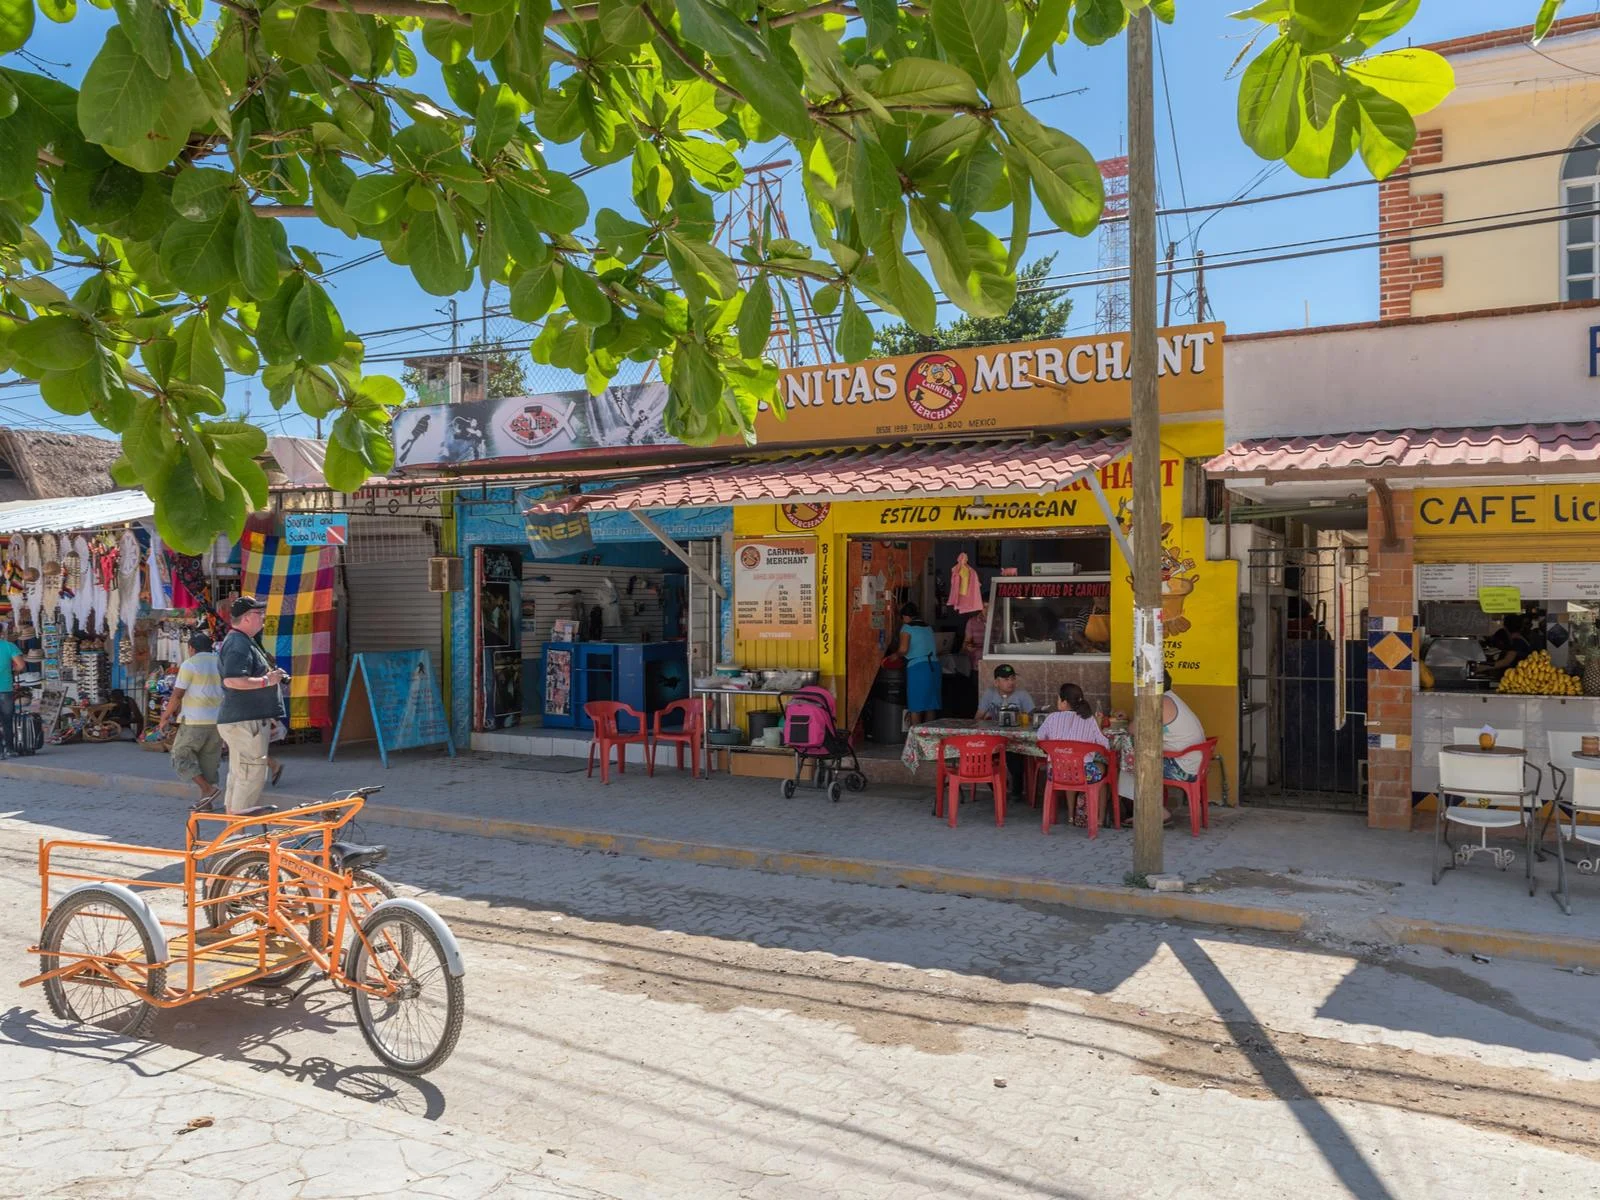 Downtown market with a bike and sandy brick streets on a nice day during the least busy time to visit Tulum